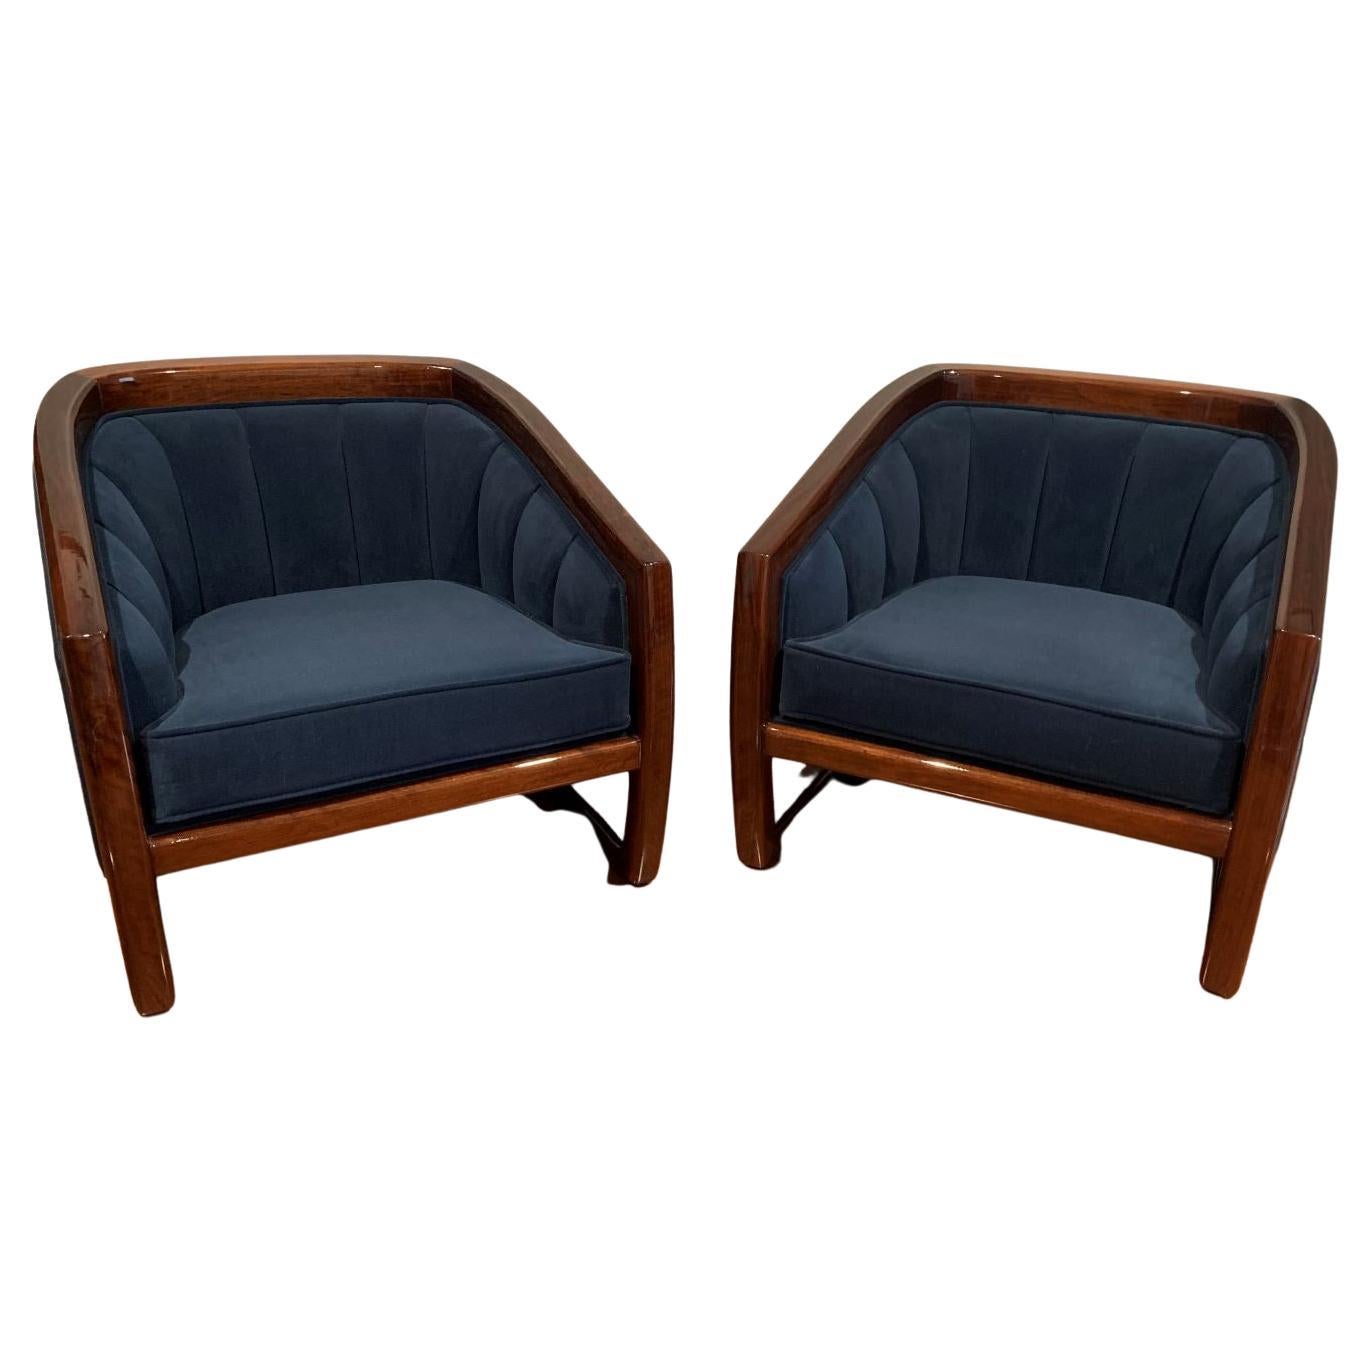 American Pair of Mid Century Rosewood Tub Chairs in the Style of Milo Baughman, C.1950 For Sale